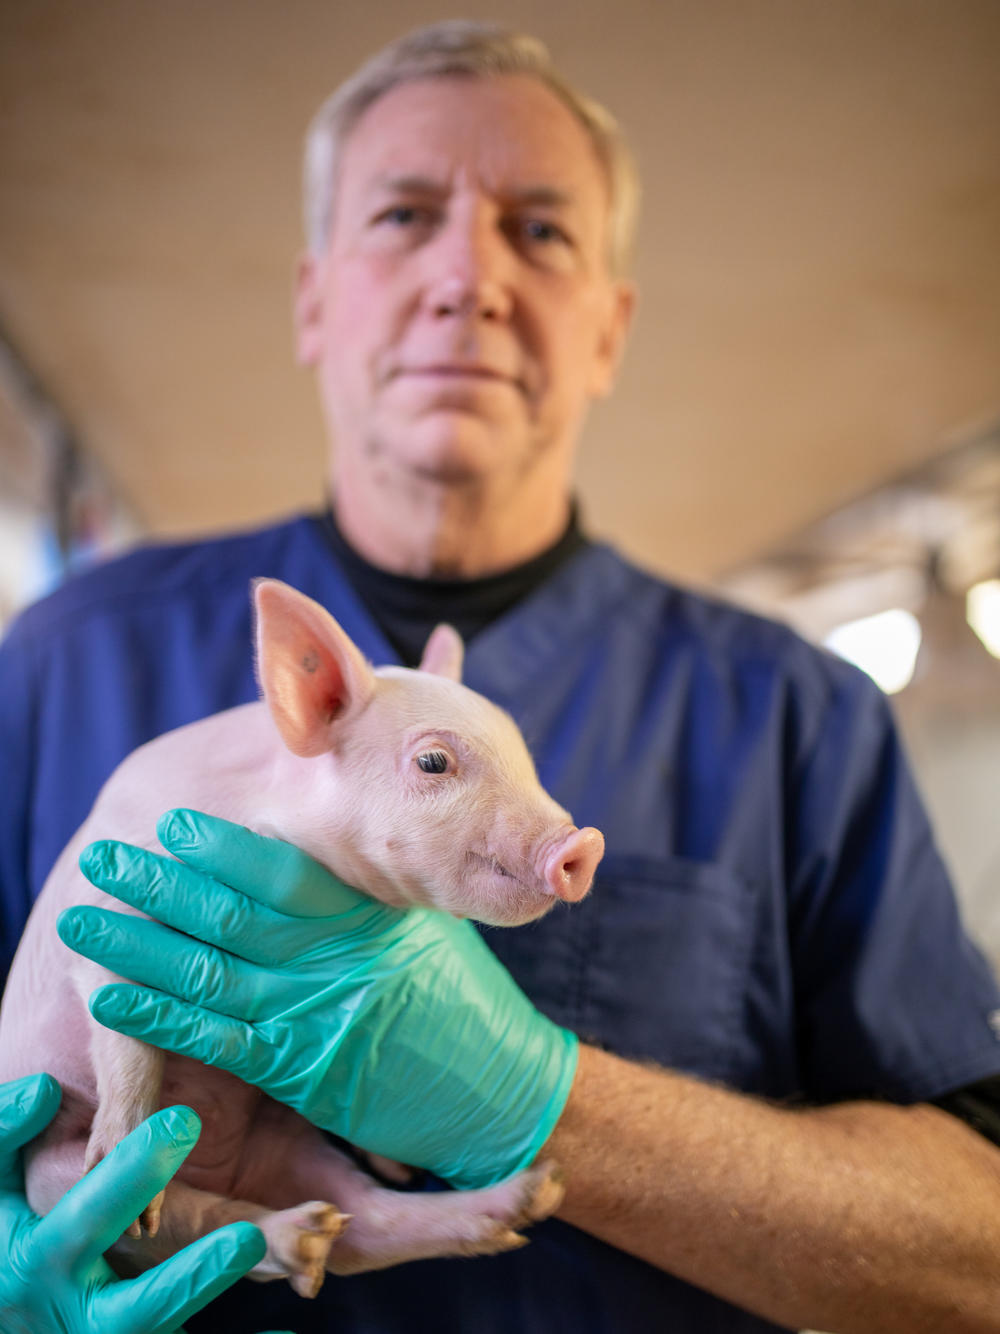 Revivicor's David Ayares acknowledges concerns about breeding pigs to provide organs for transplantation but says that this is a 